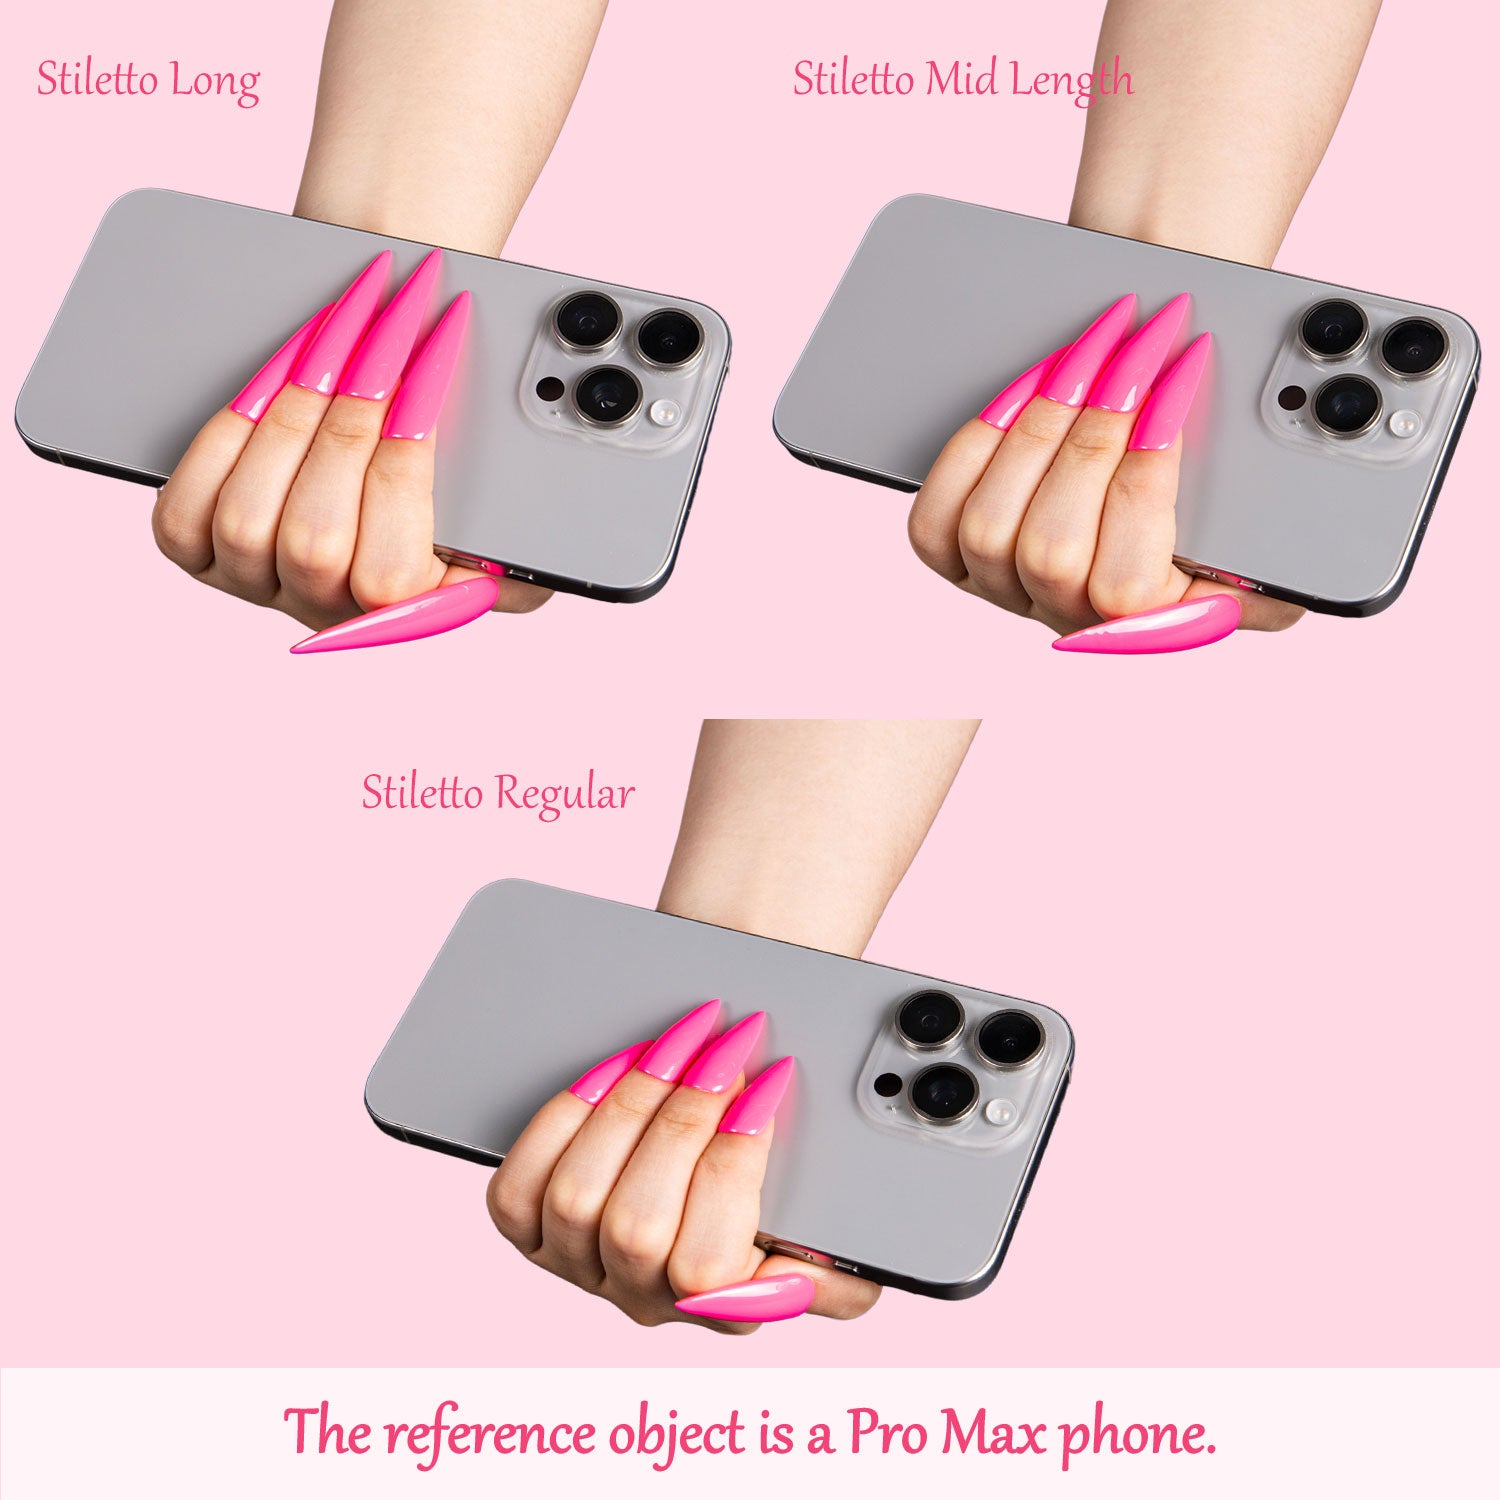 Comparison of three lengths of press-on nails: Stiletto Long, Stiletto Mid Length, and Stiletto Regular, holding a Pro Max phone. Bright pink nails on a light pink background.